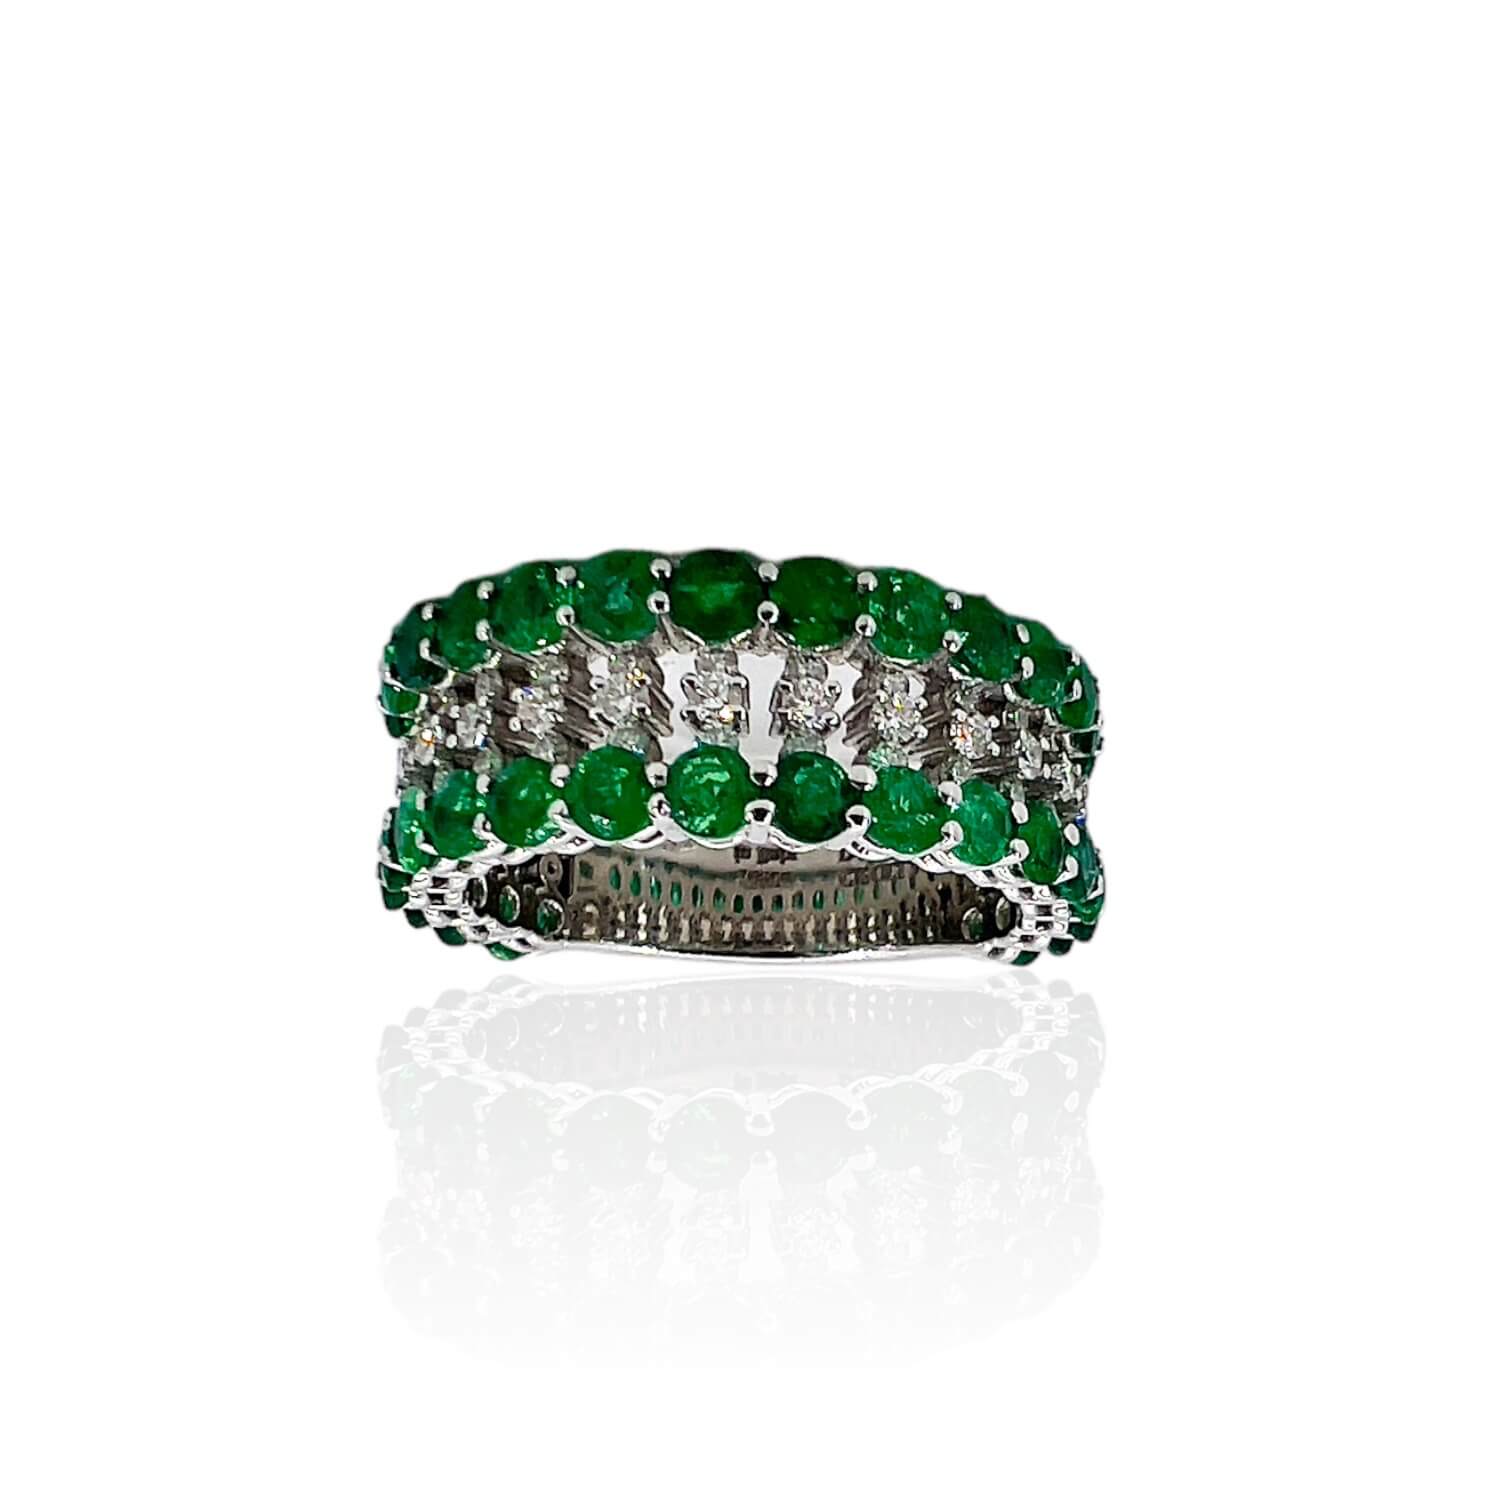 Emerald ring diamonds and gold GEMS art. 397A-S